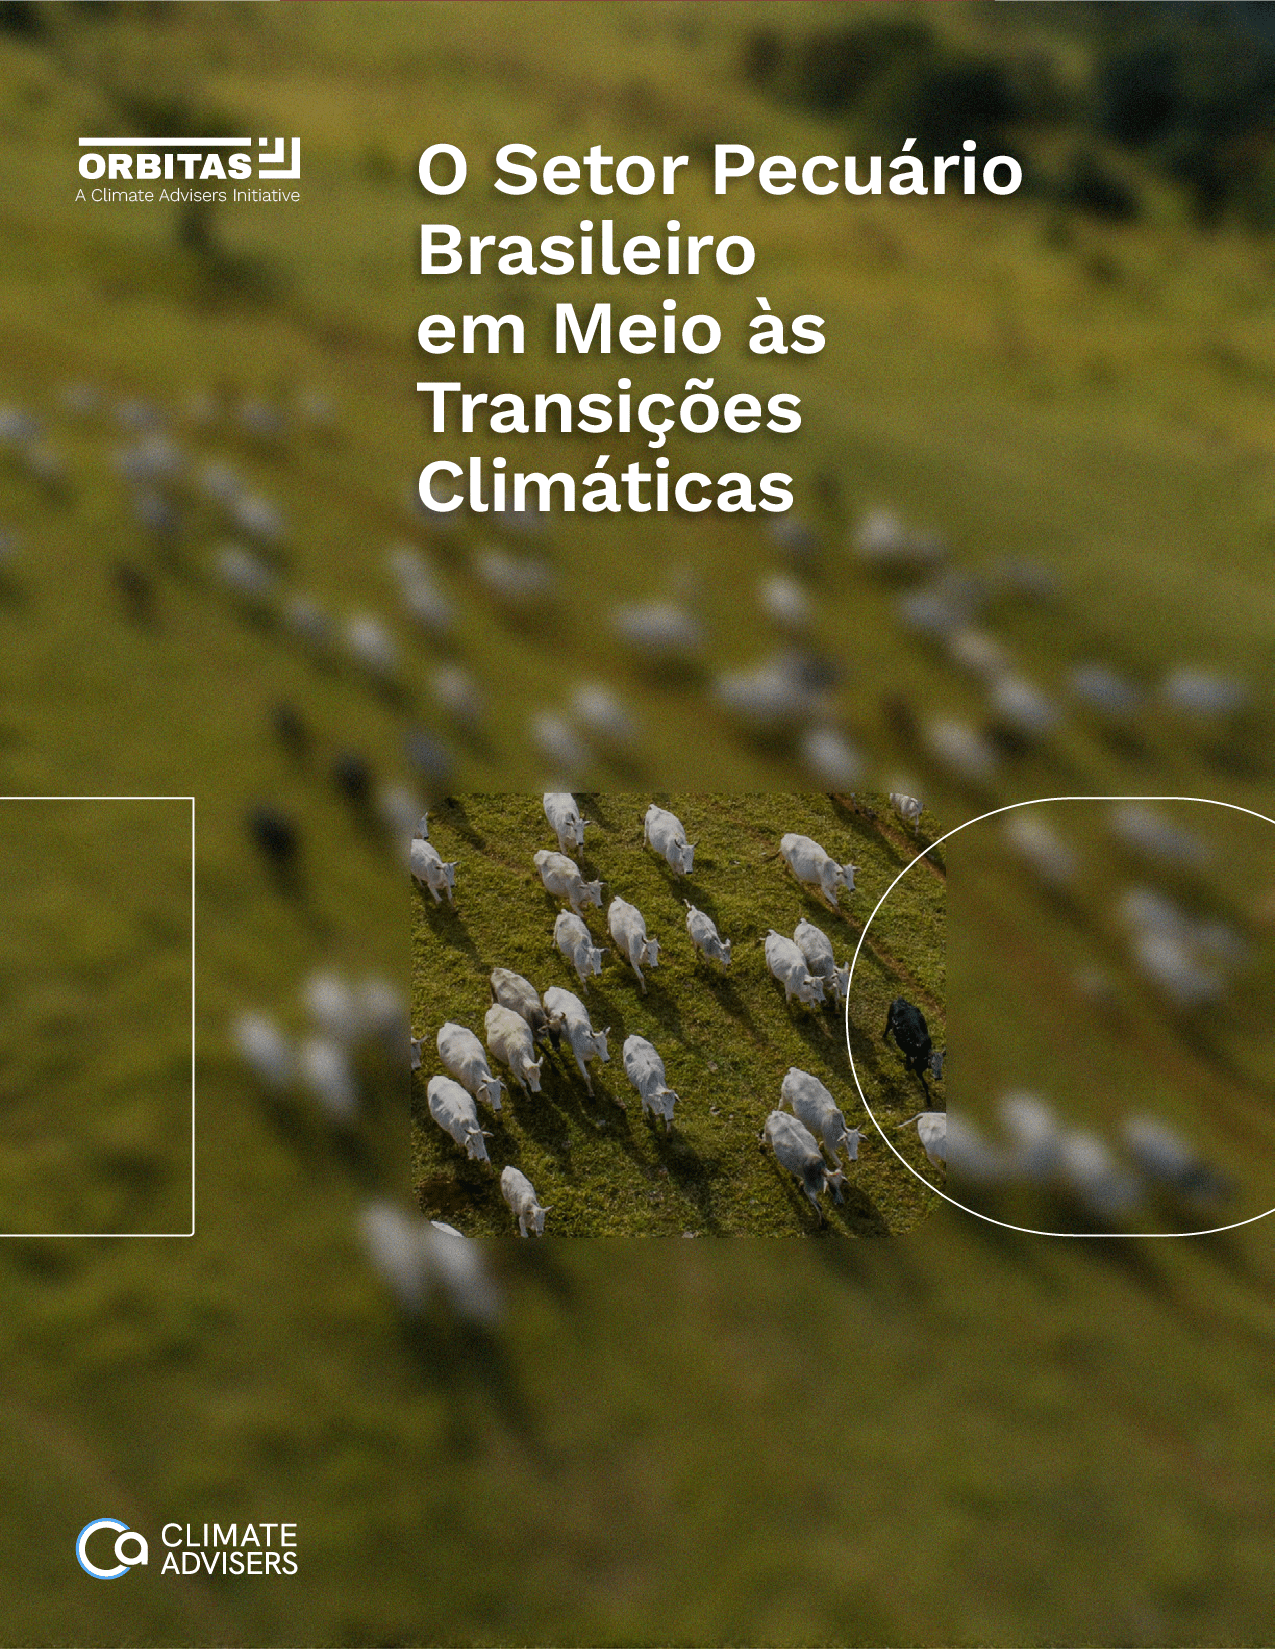 The cover of a climate report titled "Brazil's Cattle Sector Amidsst Climate Transitions."